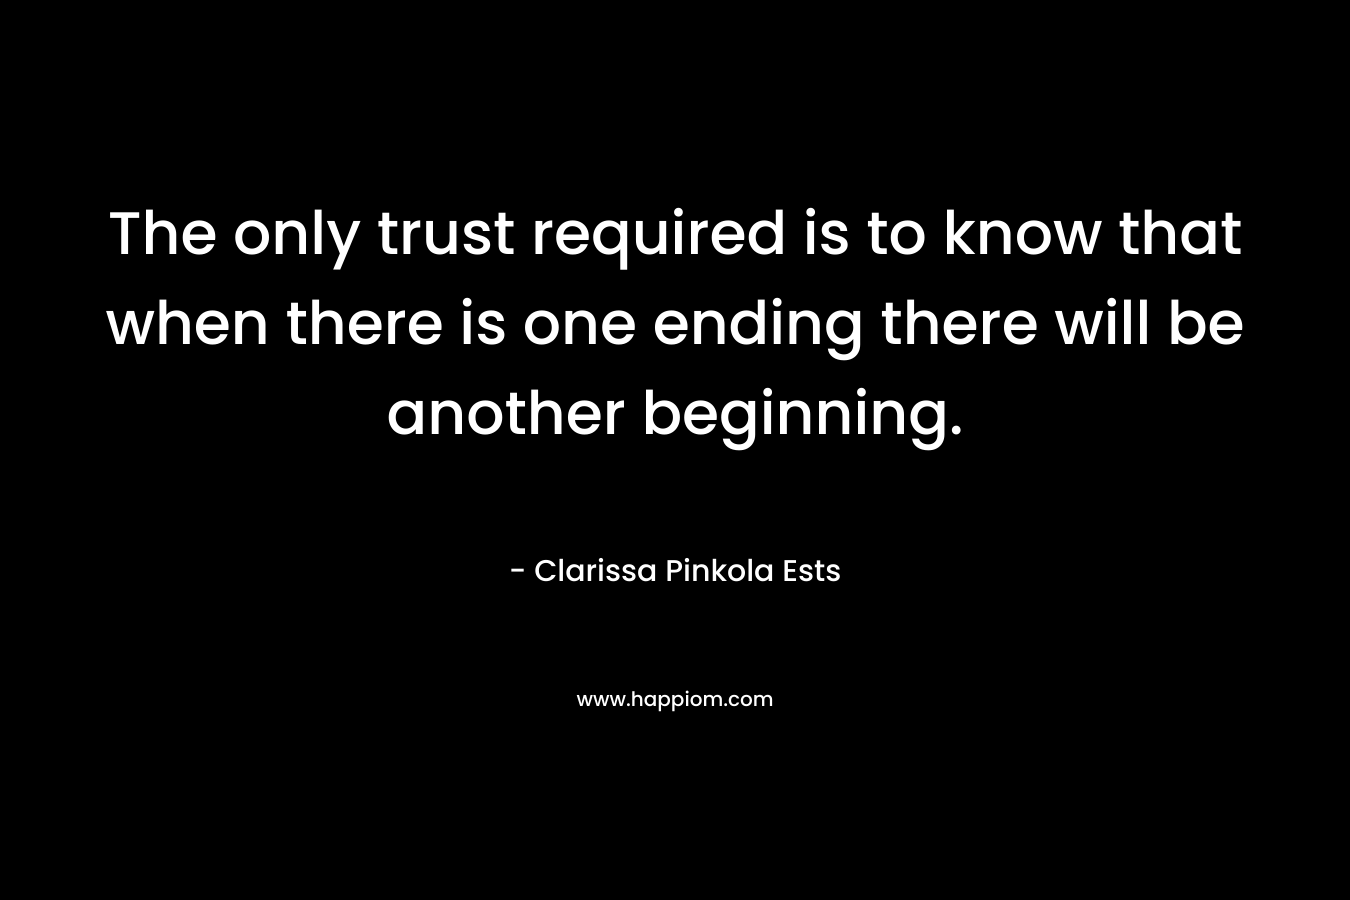 The only trust required is to know that when there is one ending there will be another beginning. – Clarissa Pinkola Ests